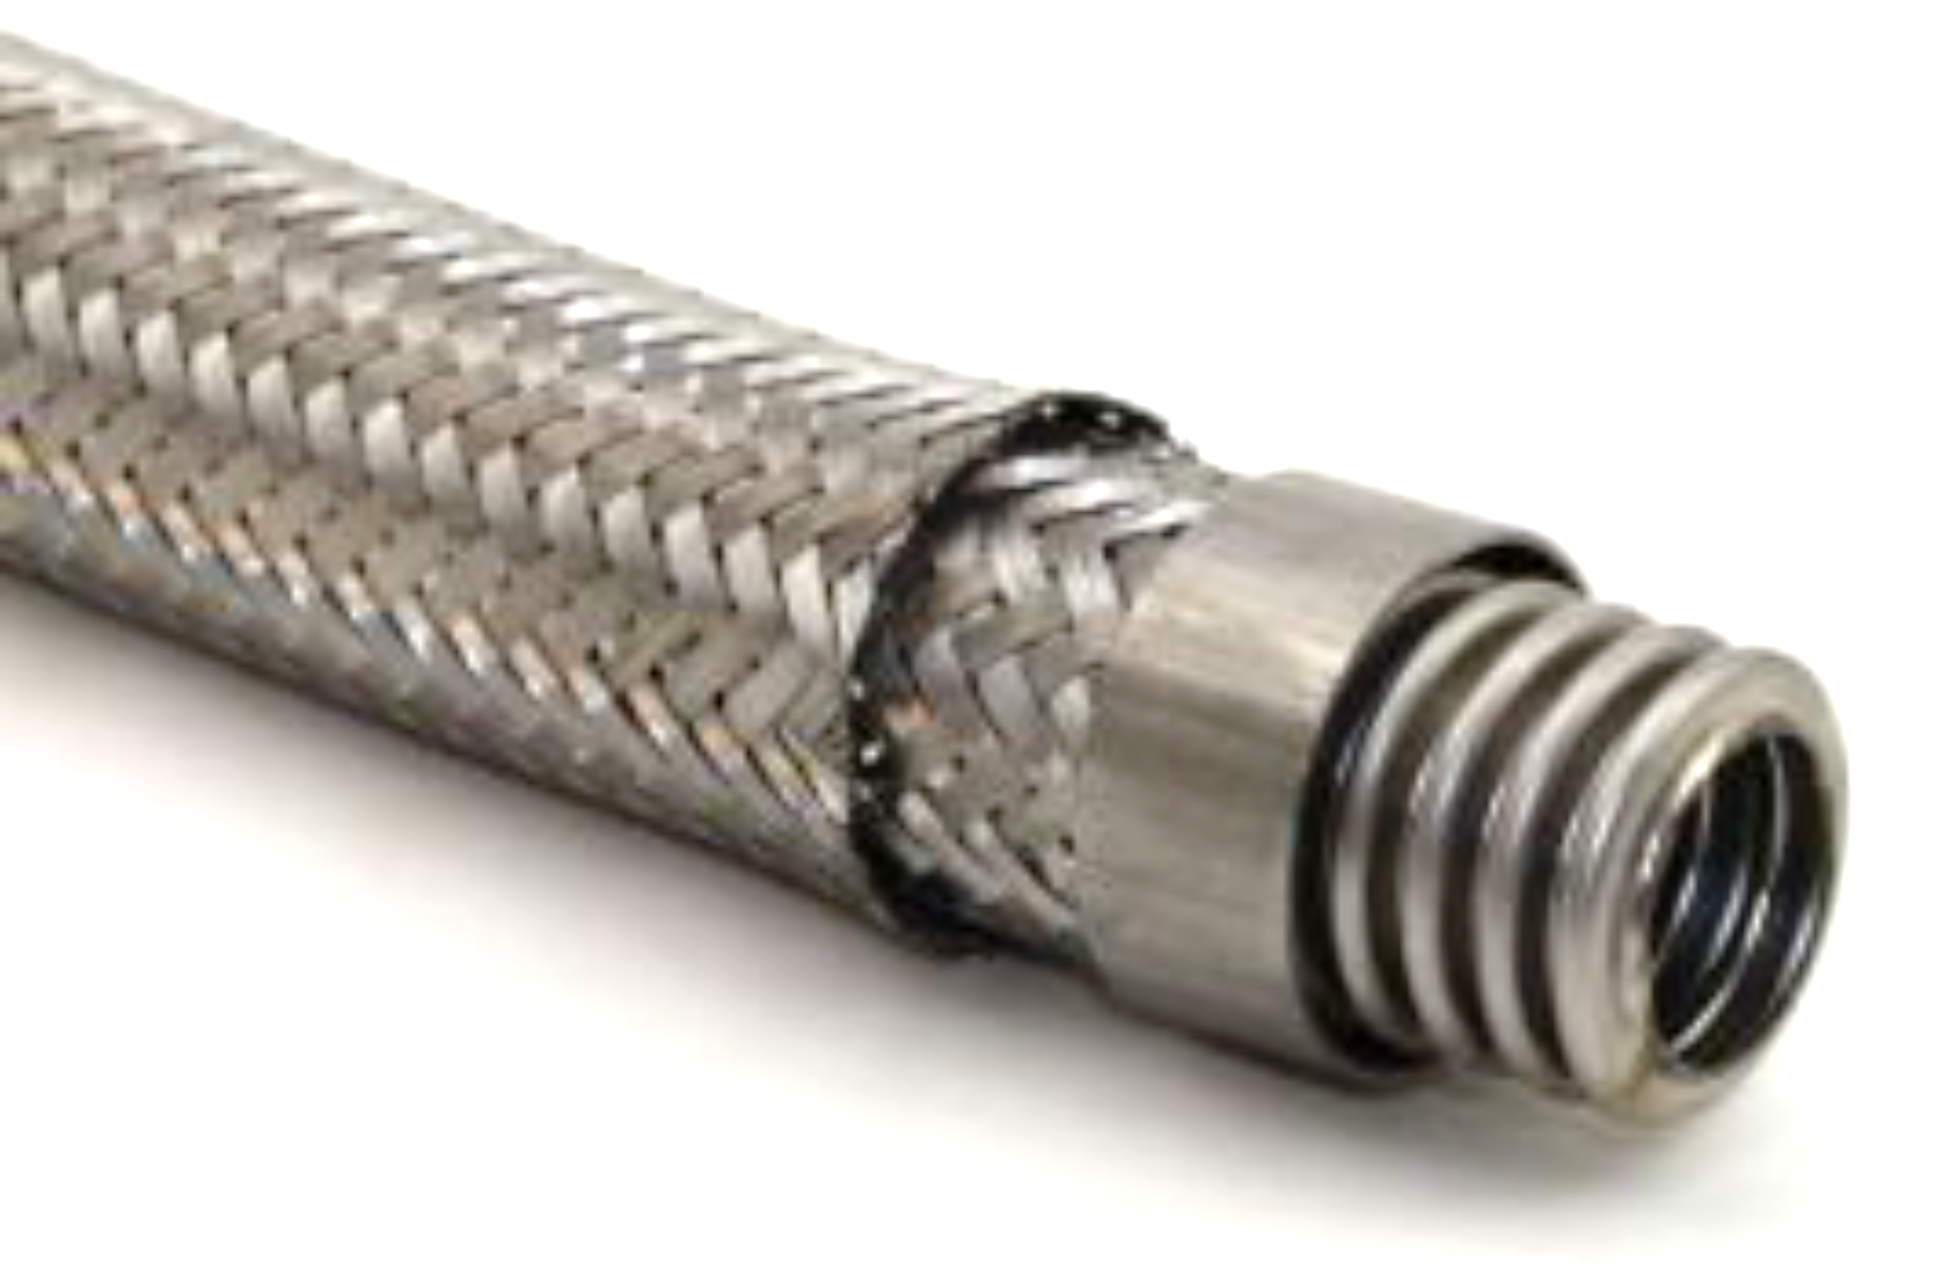 3/4 - SS321 Corrugated Metal Hose w/ Double SS304 Braid - (P4DB-H4021-012)  - Cut and Couple